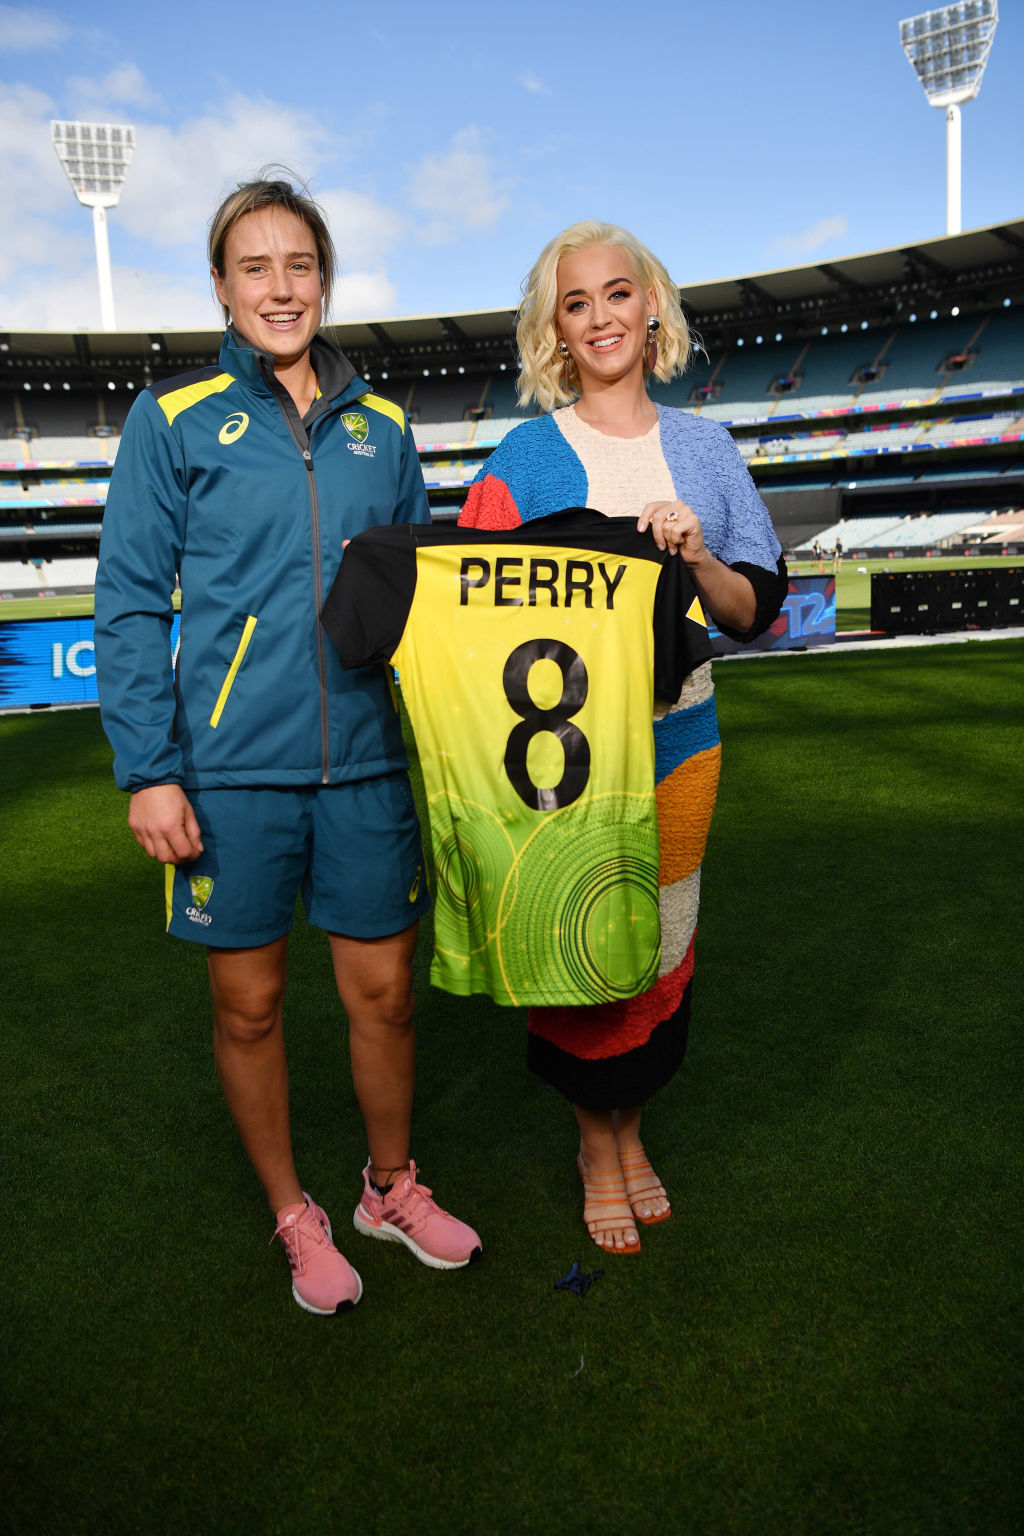 Australian cricket star Ellyse Perry on levelling the playing field